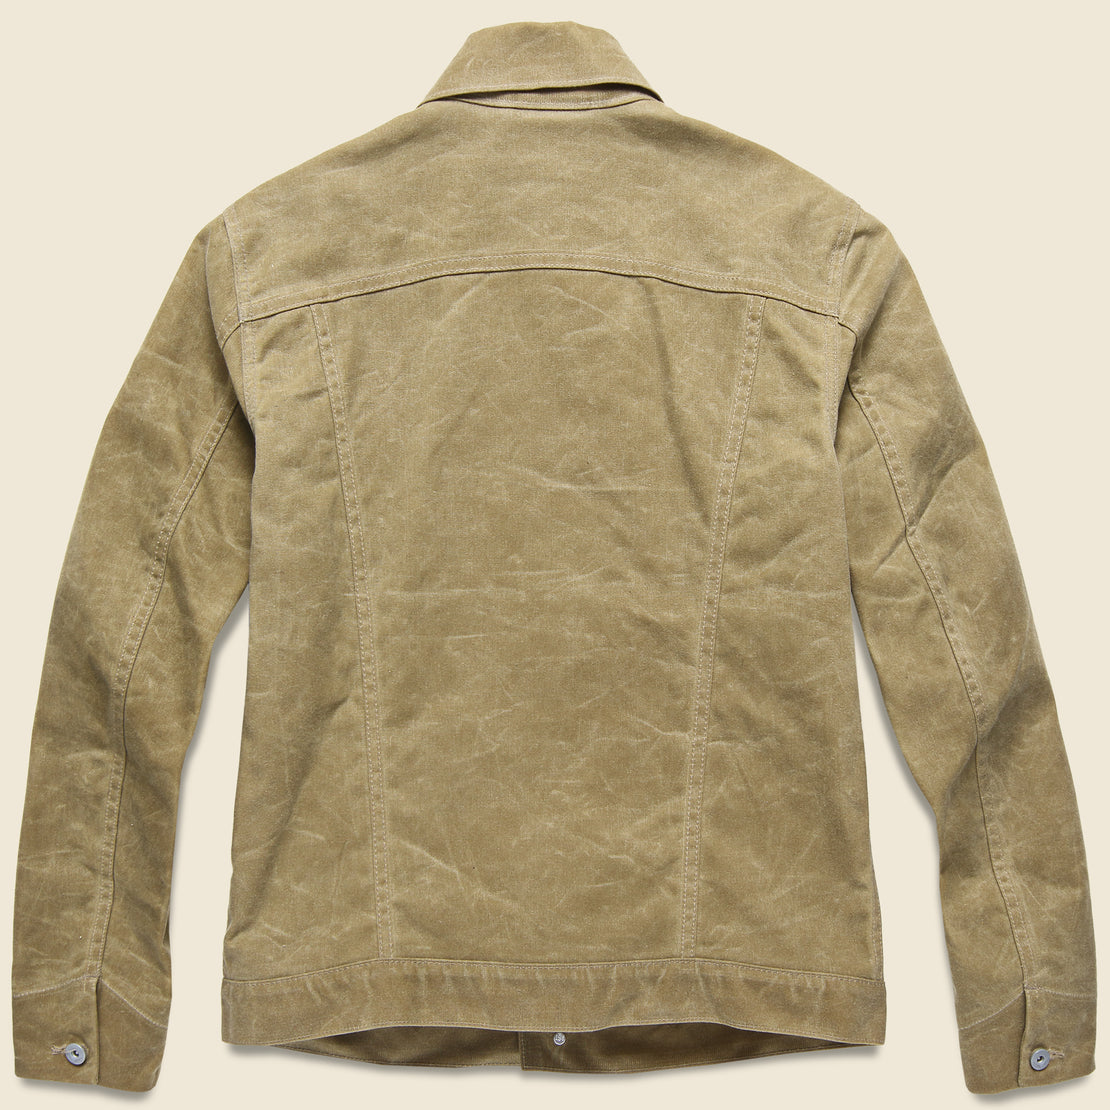 Supply Jacket - Blanket Lined Waxed Tan Ridgeline - Rogue Territory - STAG Provisions - Outerwear - Coat / Jacket